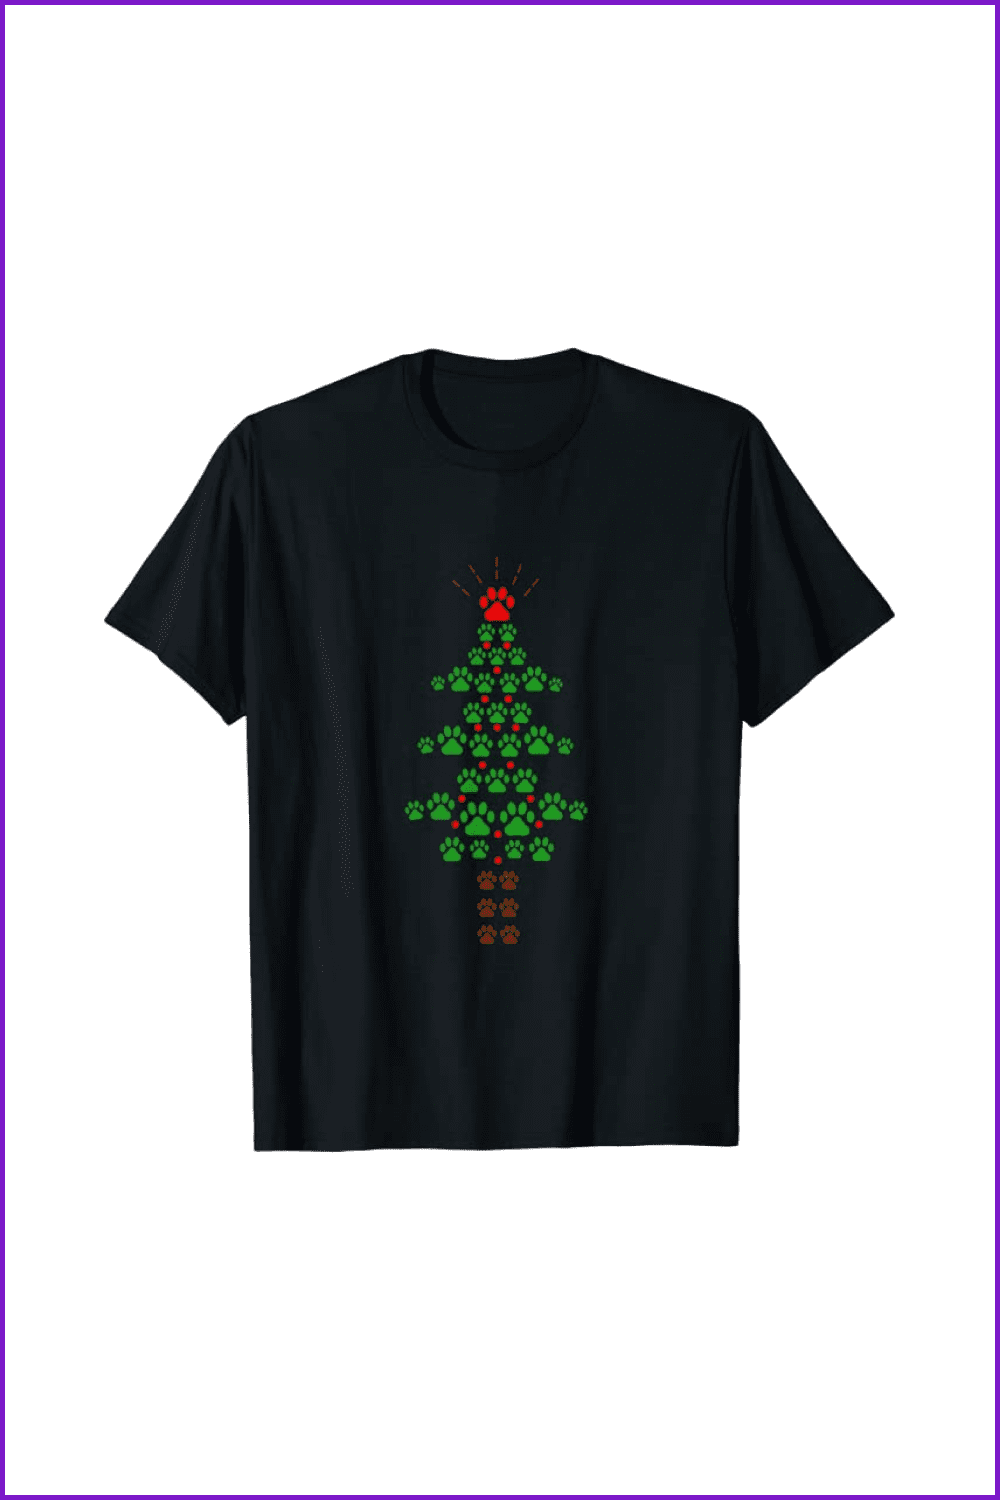 Black t-shirt with a Christmas tree made of dog paw prints.